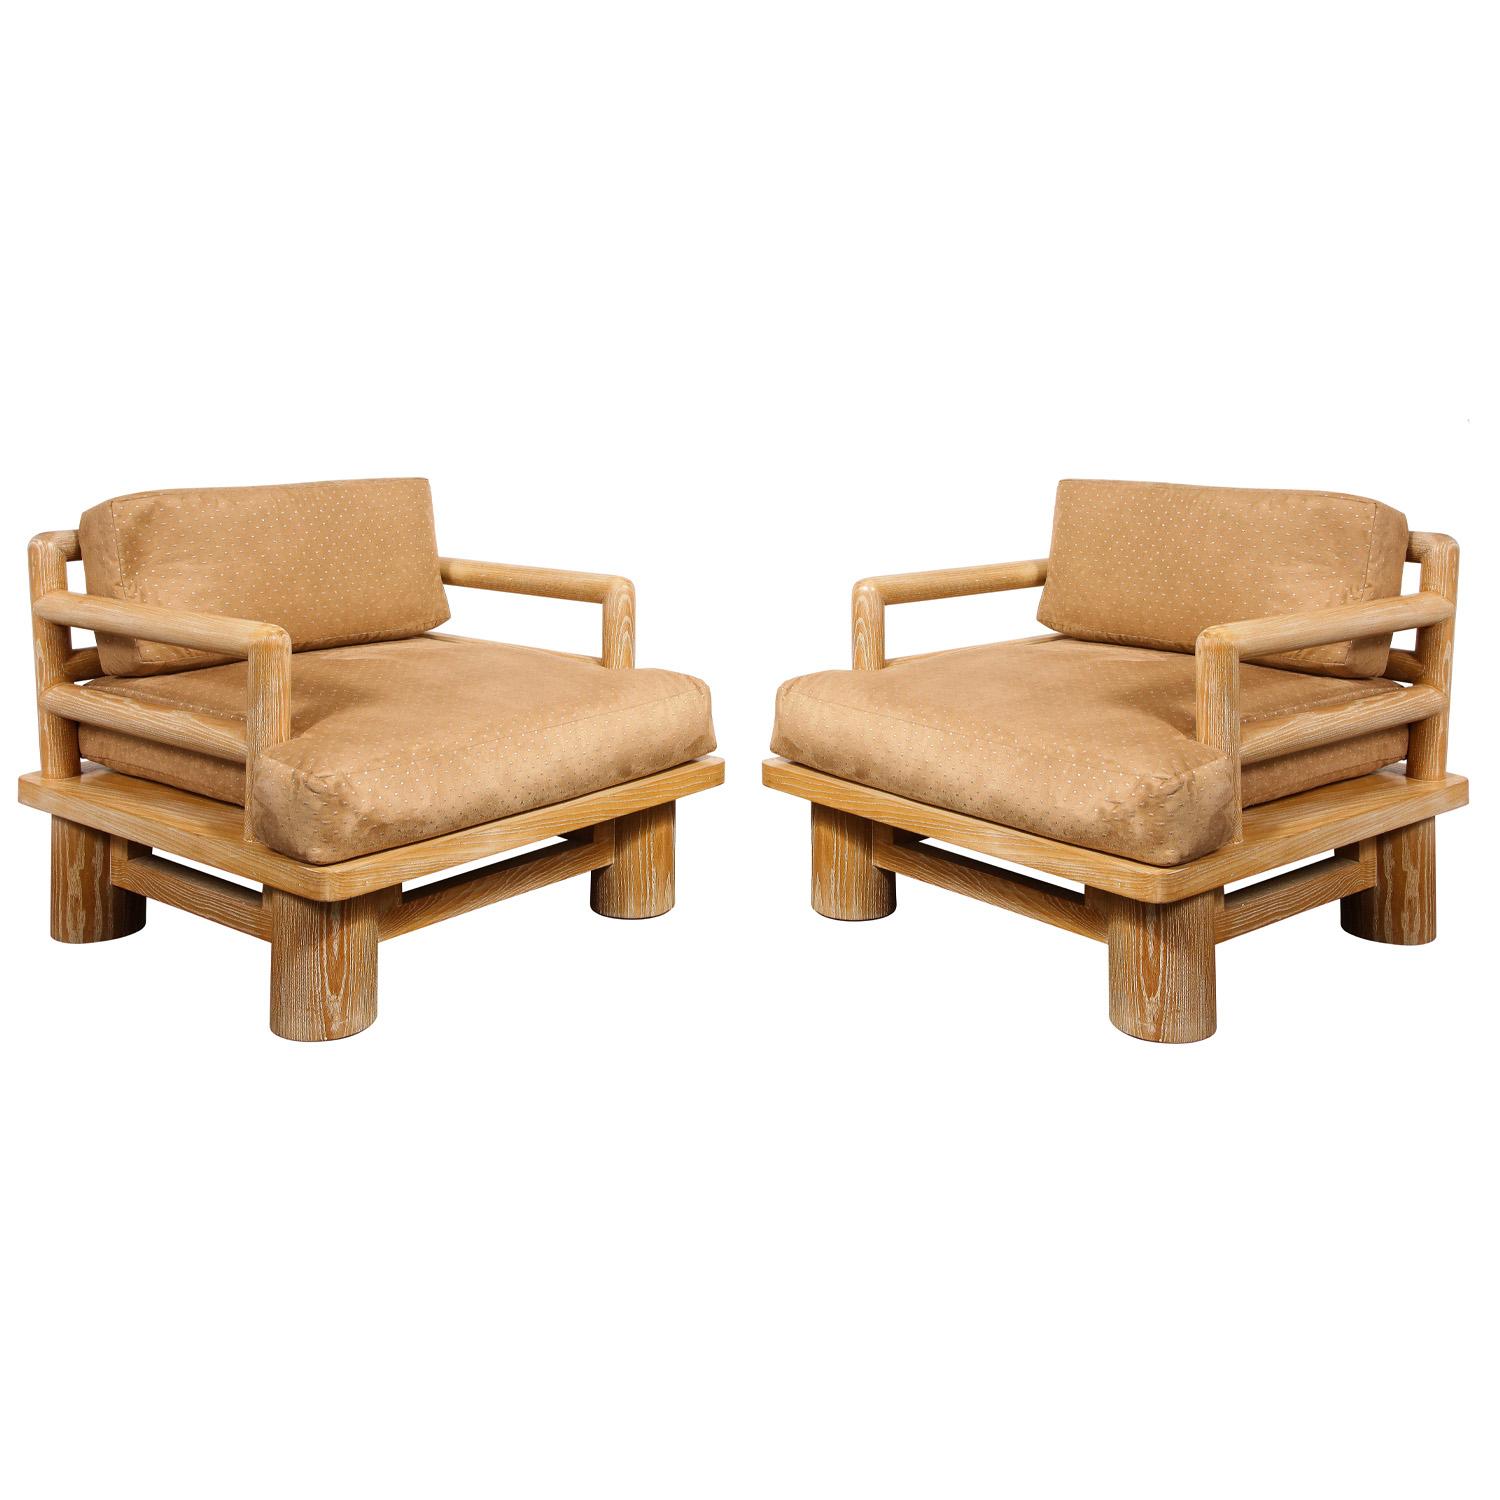 Pair of meticulously crafted lounge chairs, 